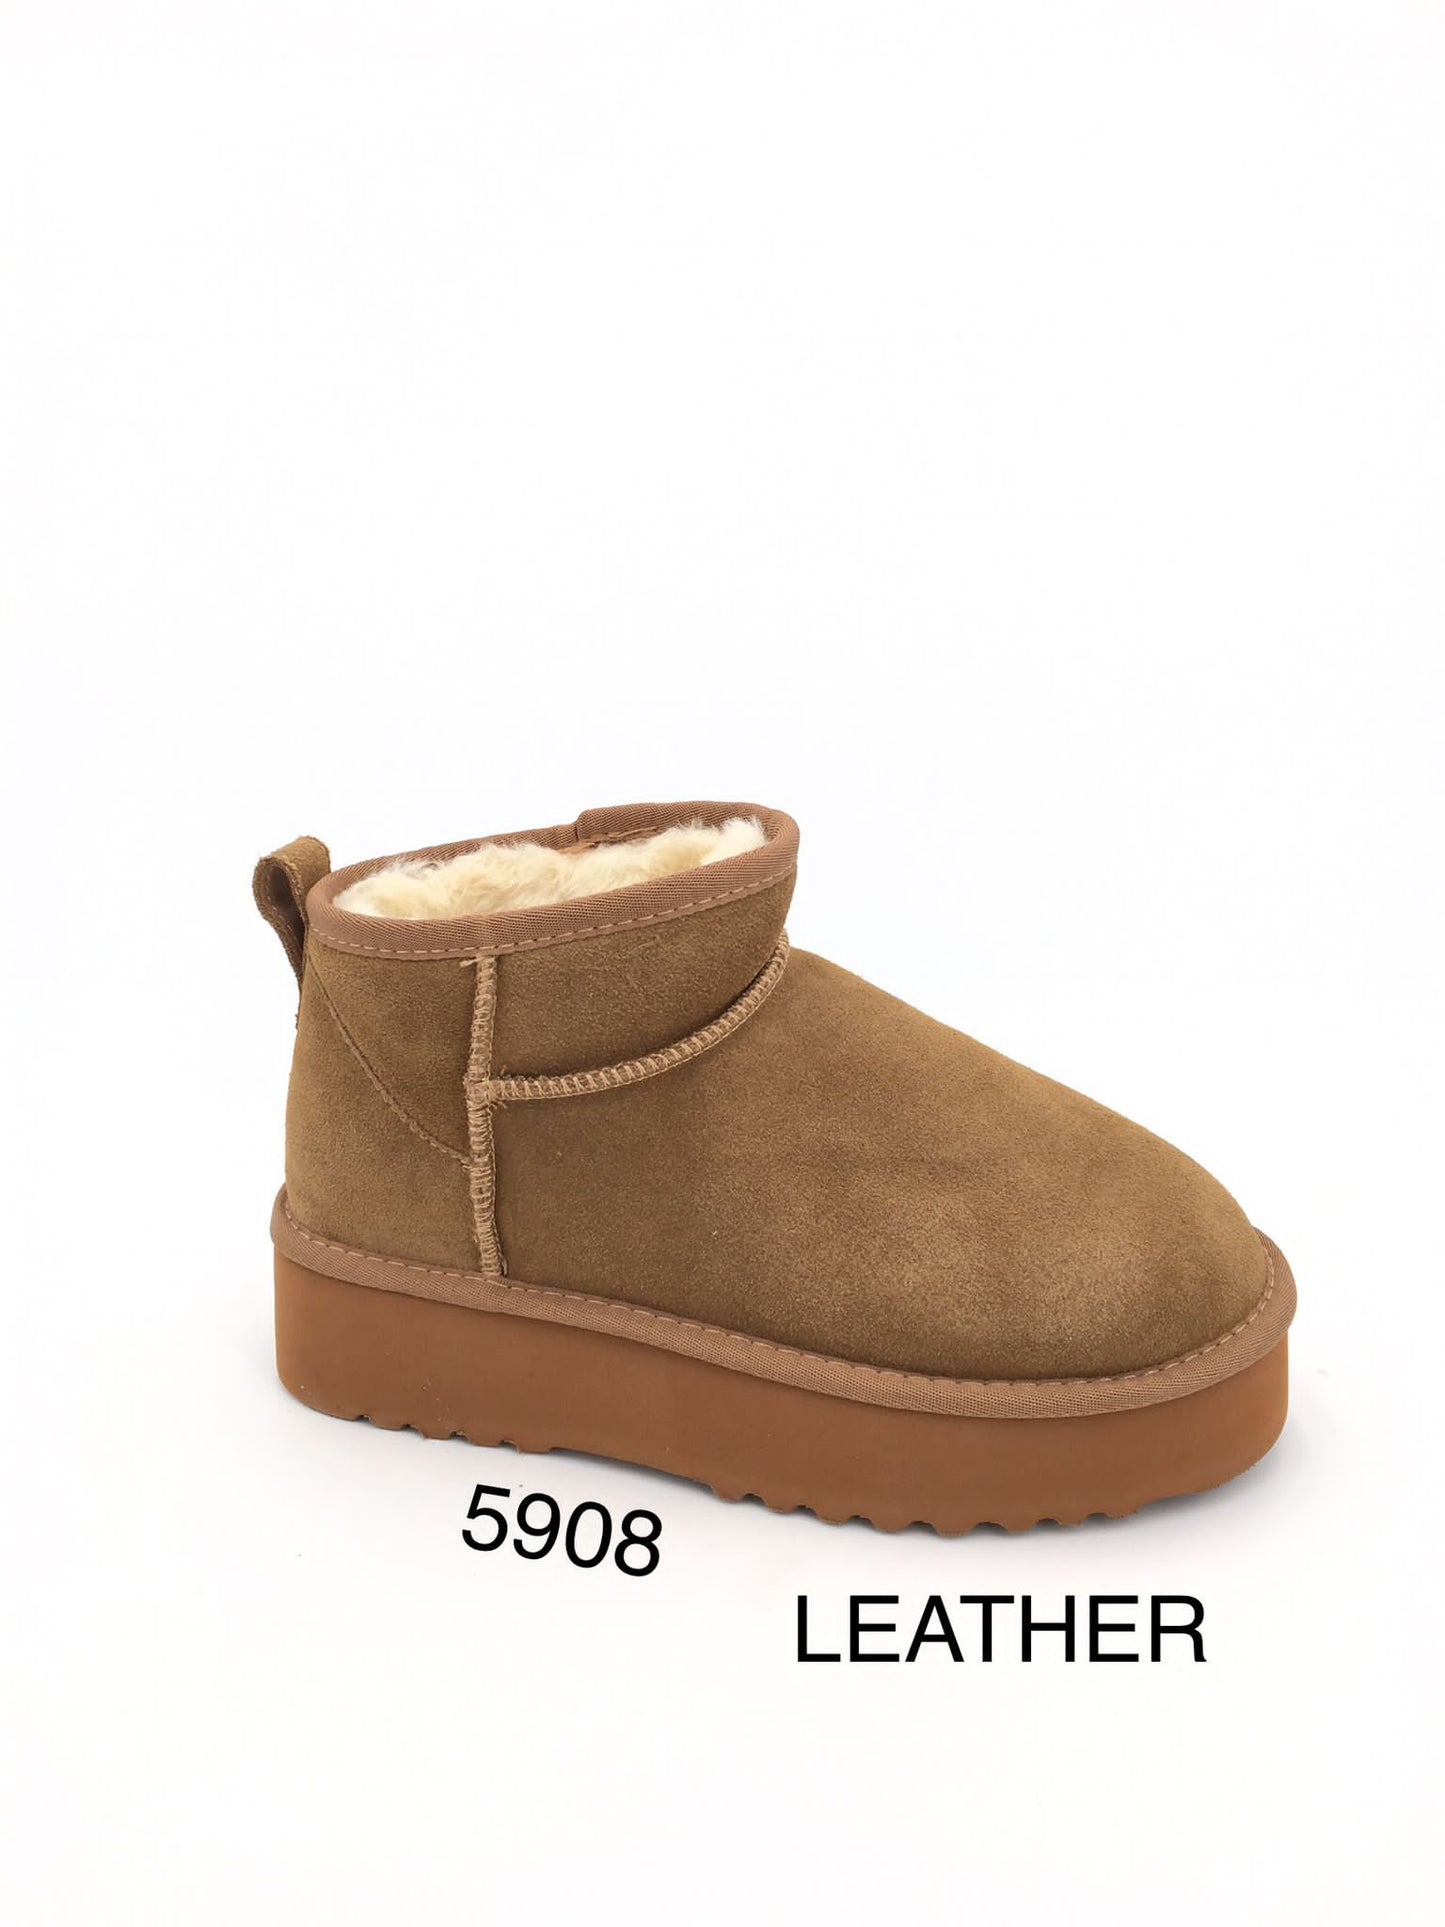 Real leather uggies camel